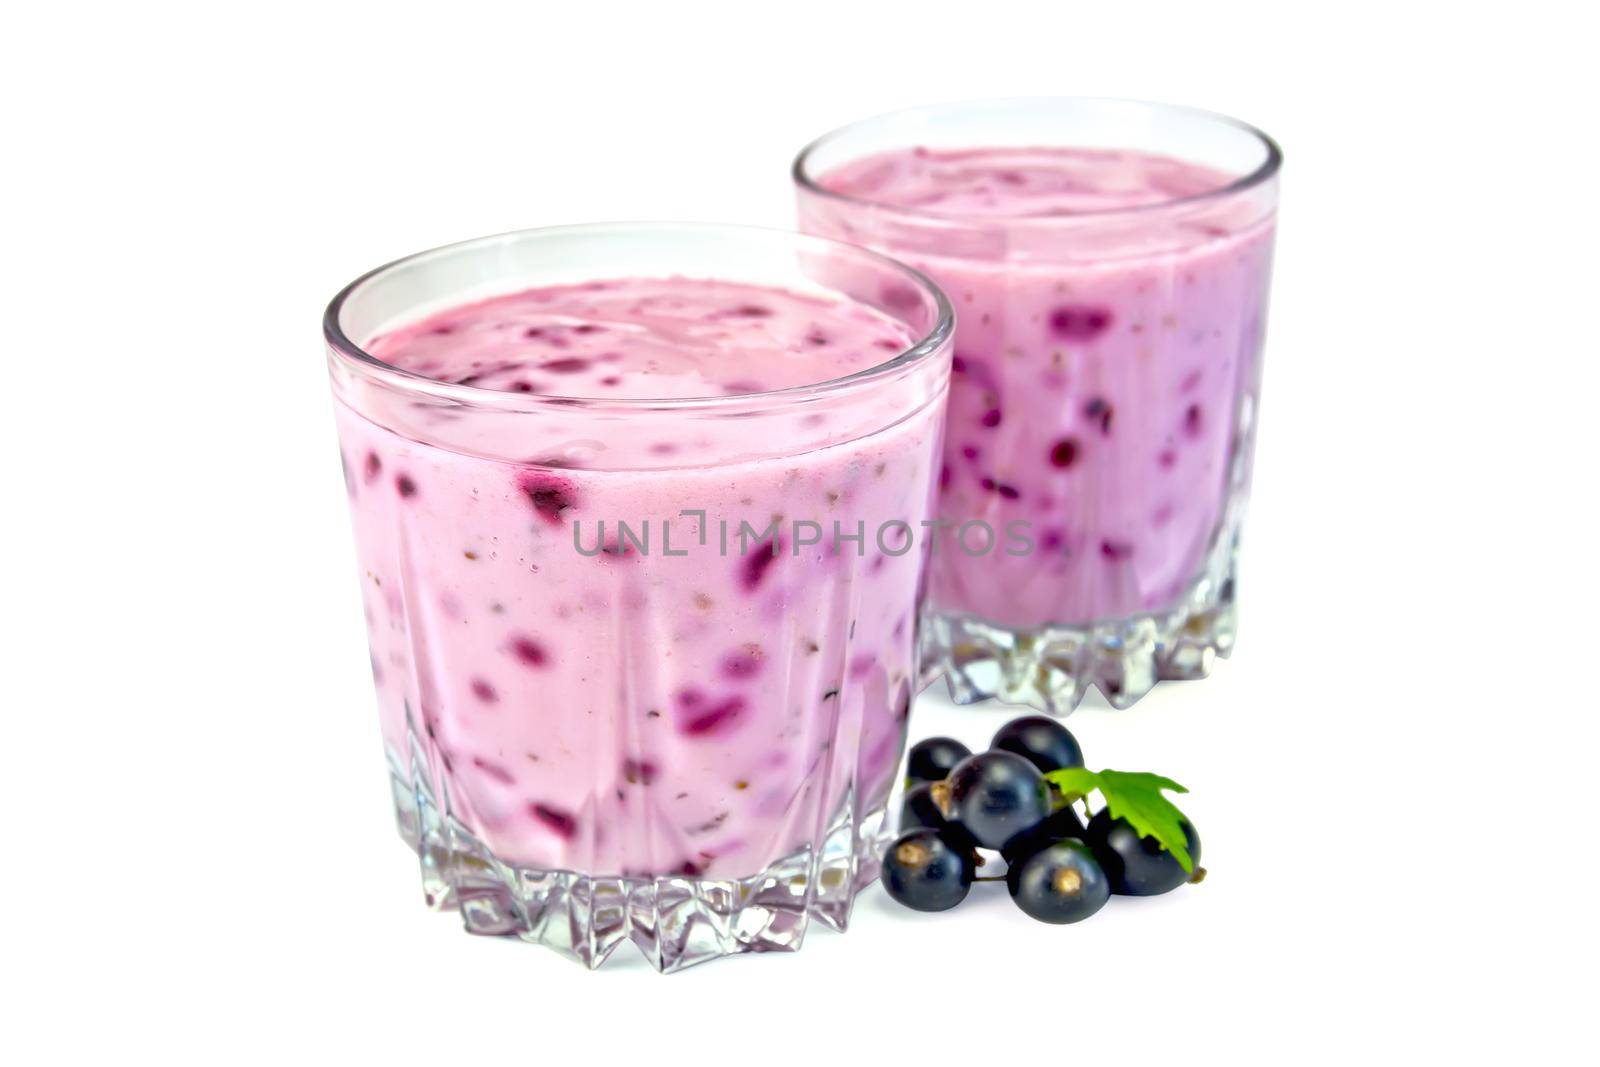 Milkshake with black currants in two glass by rezkrr